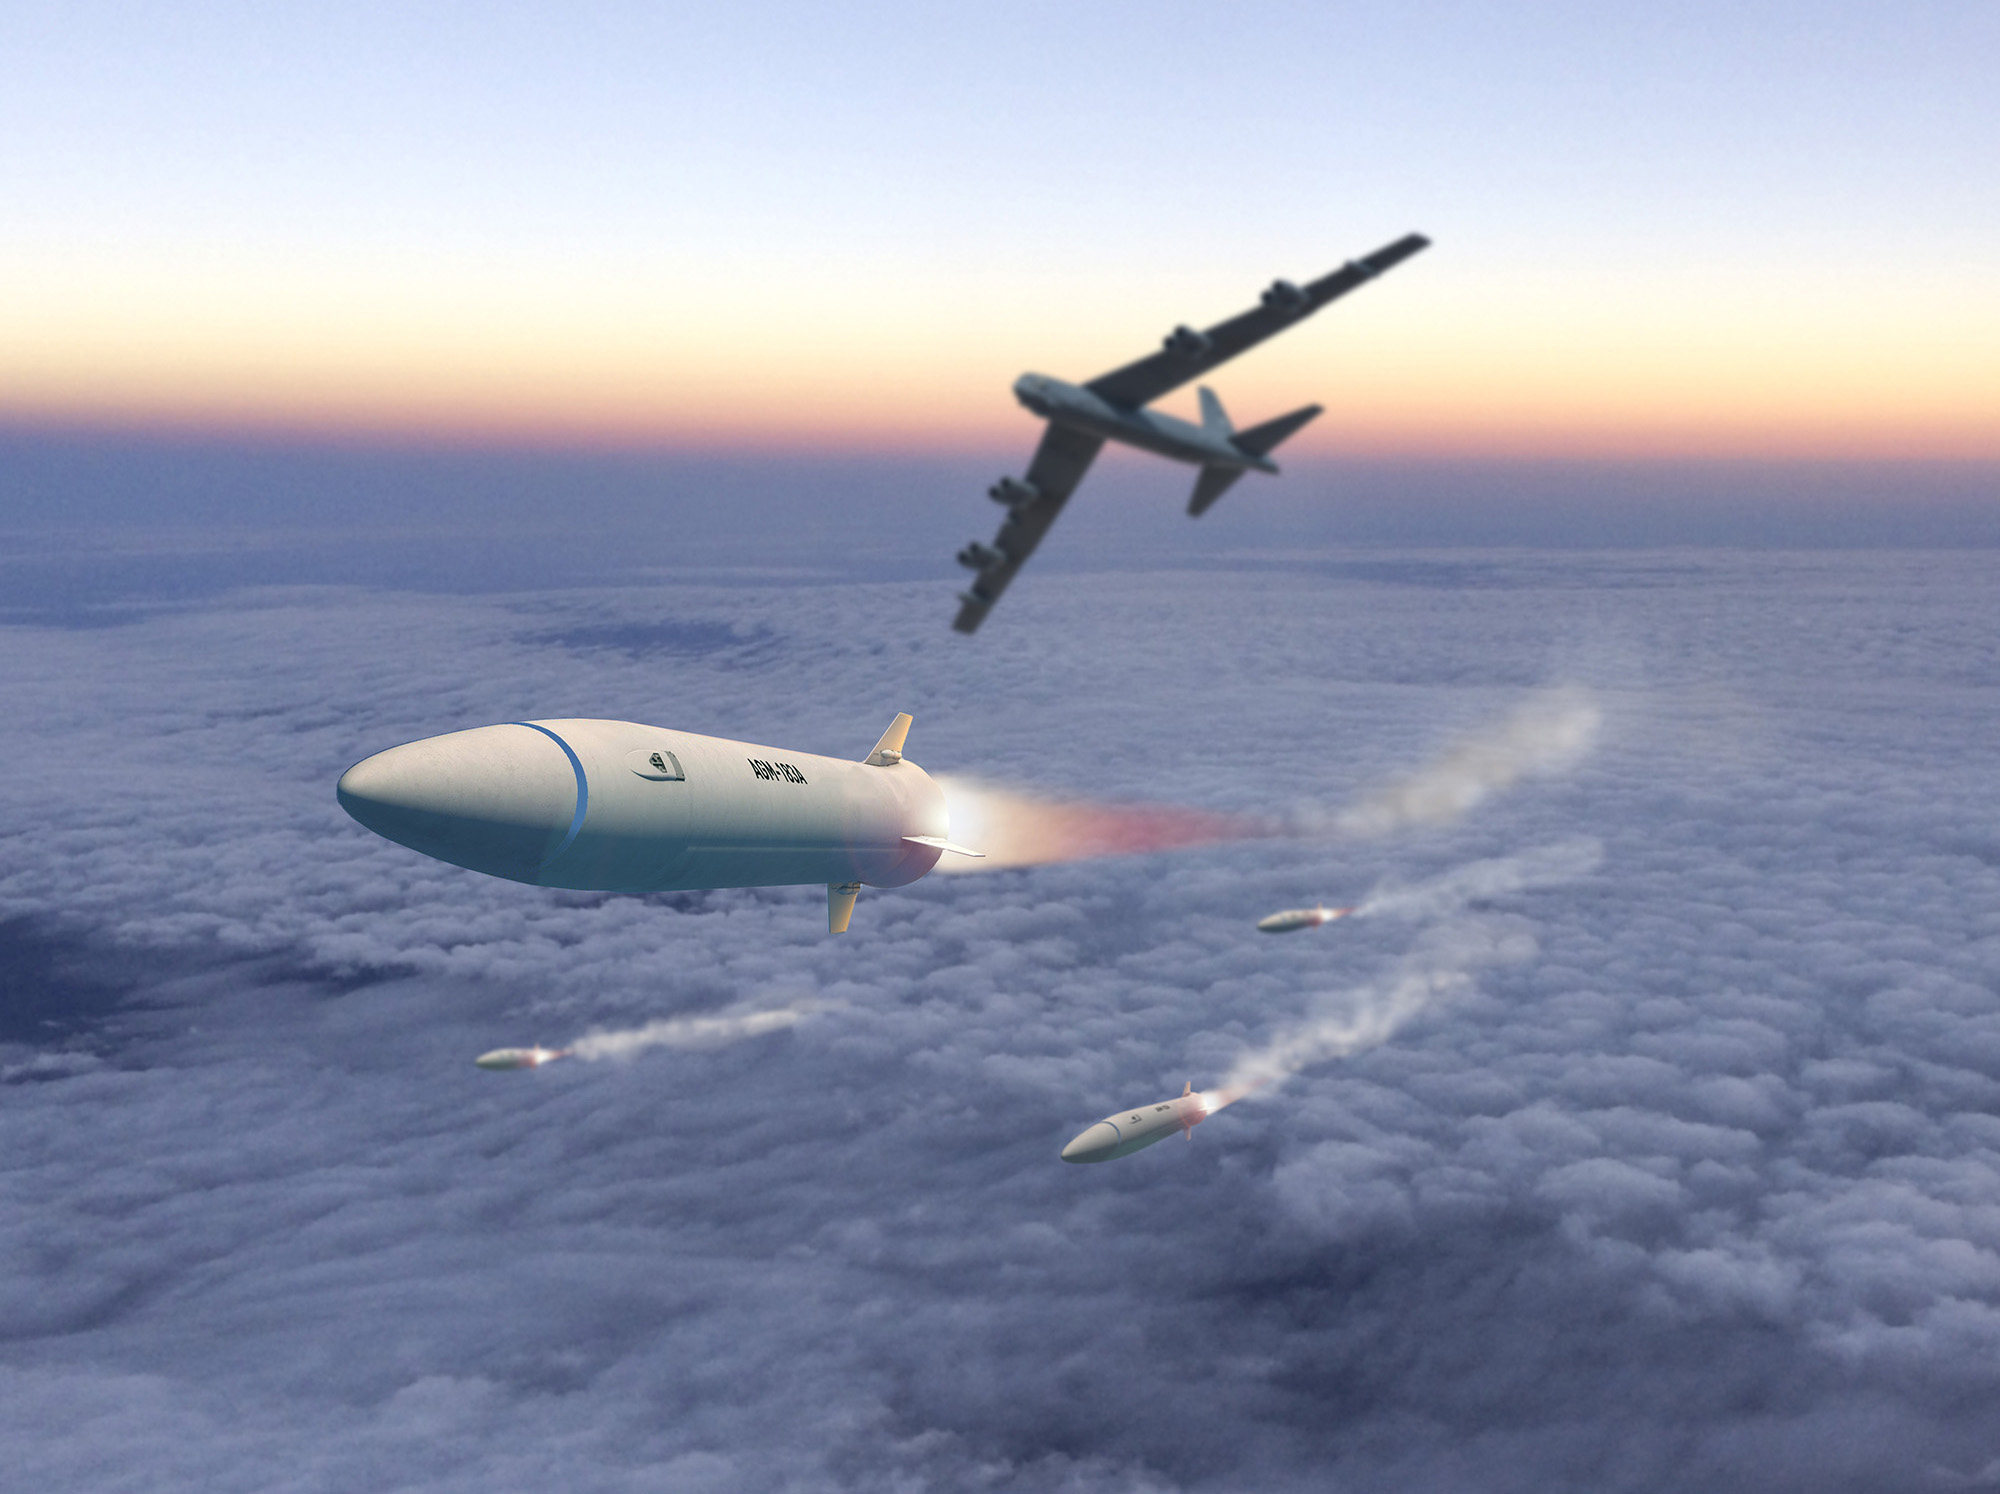 Concept art shows US defence giant Lockheed Martin’s hypersonic Air-launched Rapid Response Weapon (ARRW). The US Air Force recently announced it would no longer pursue the missile’s development. Photo: Lockheed Martin